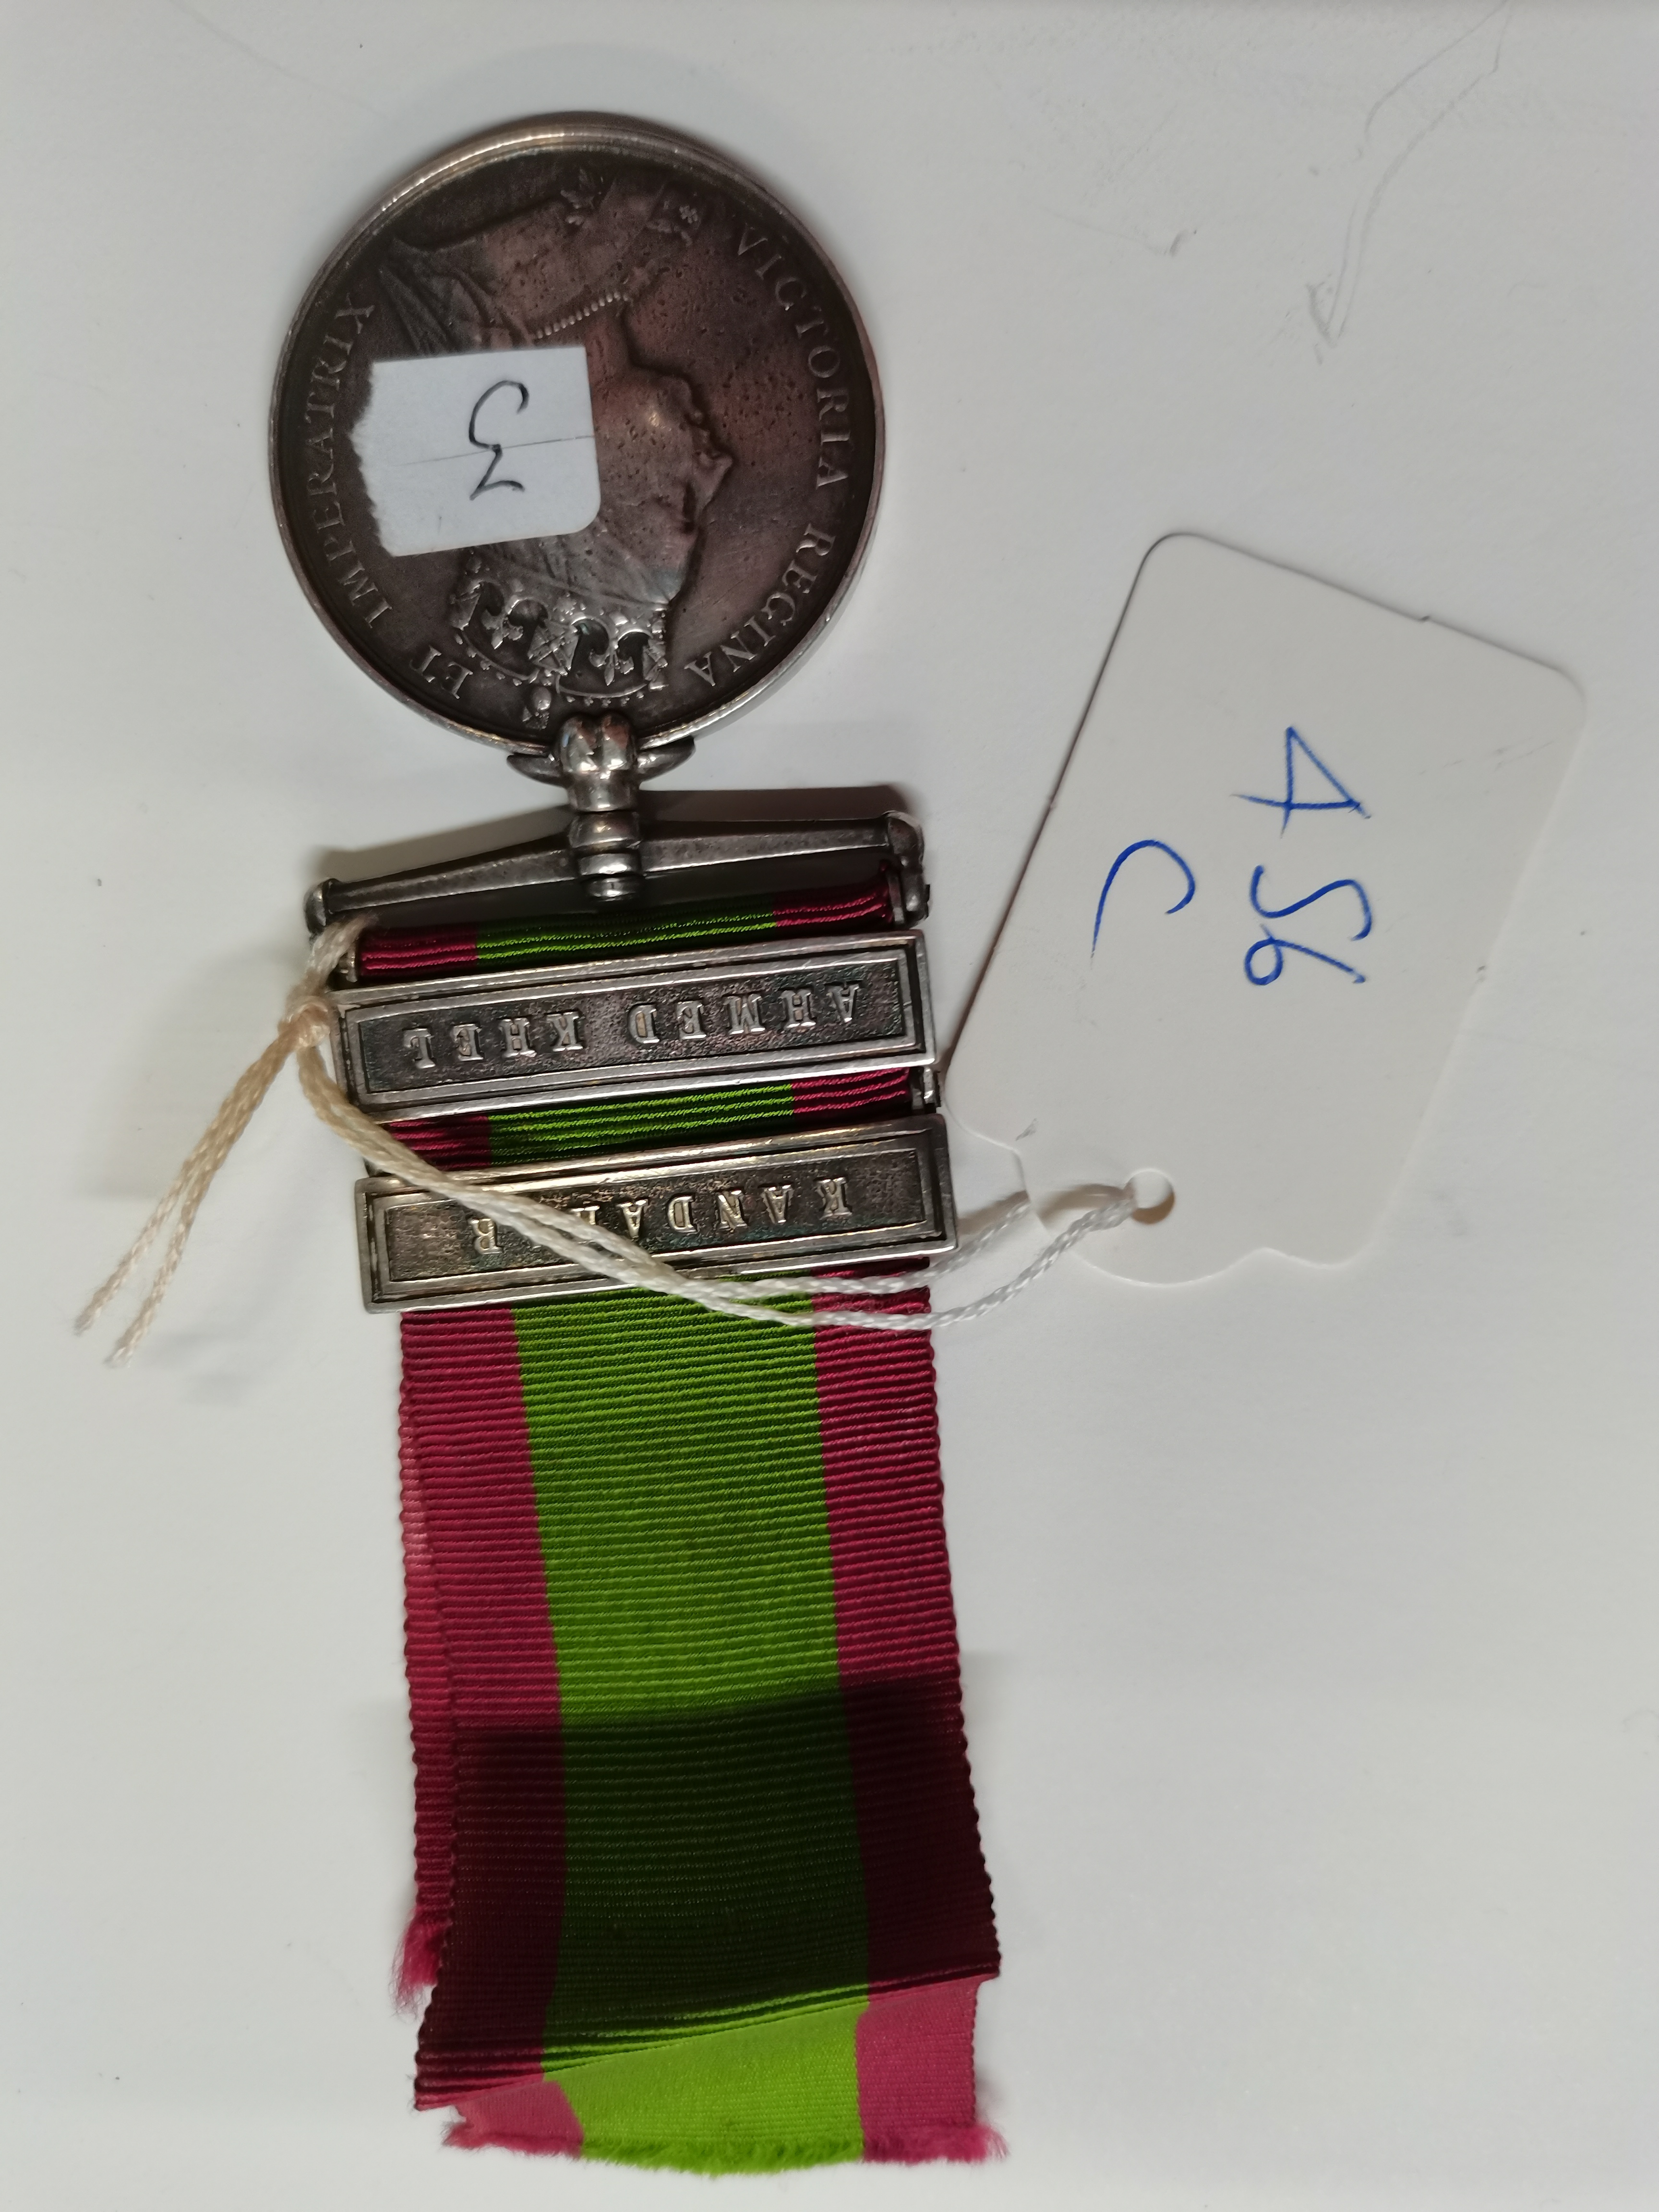 Afganistan 1878 medal with 2 x clasps to 7515 PTE. F. TOE 2/60TH - Image 4 of 4